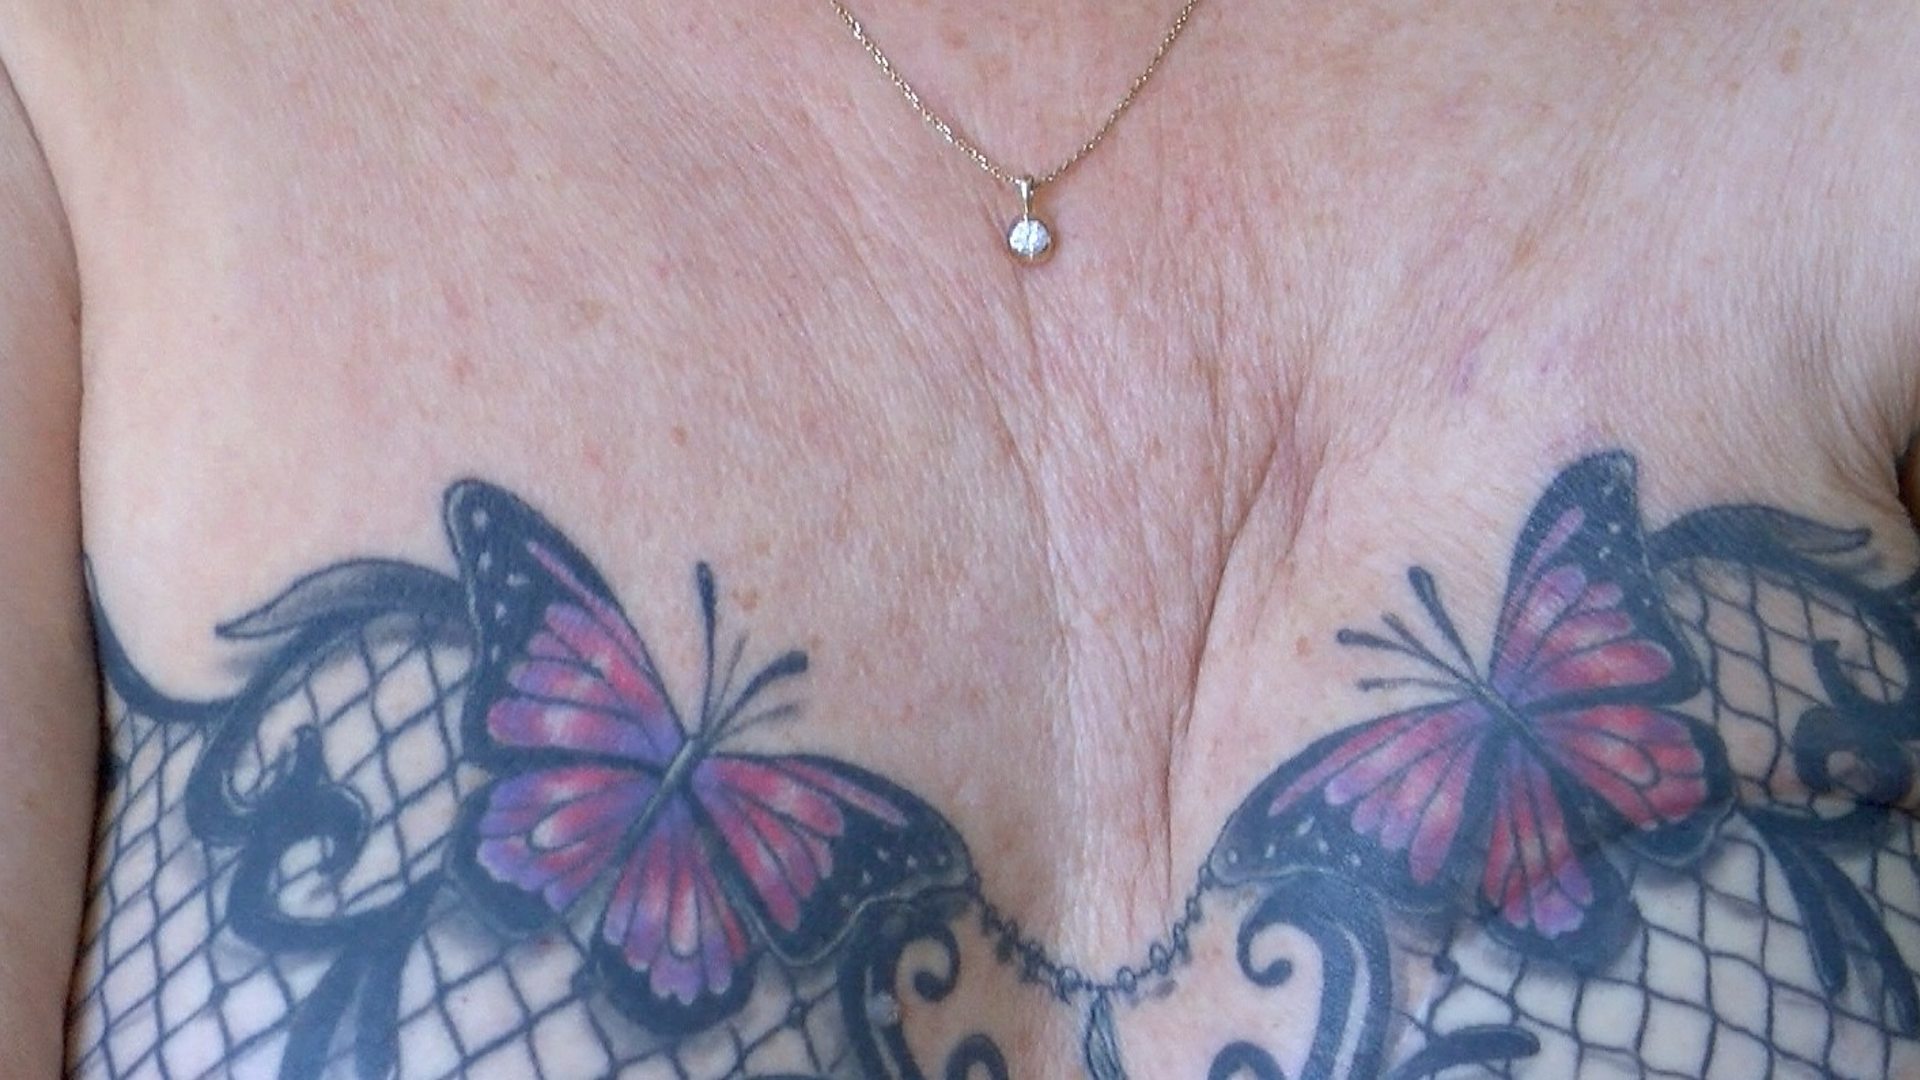 Bra tattoo changed woman's life after breast cancer - BBC News